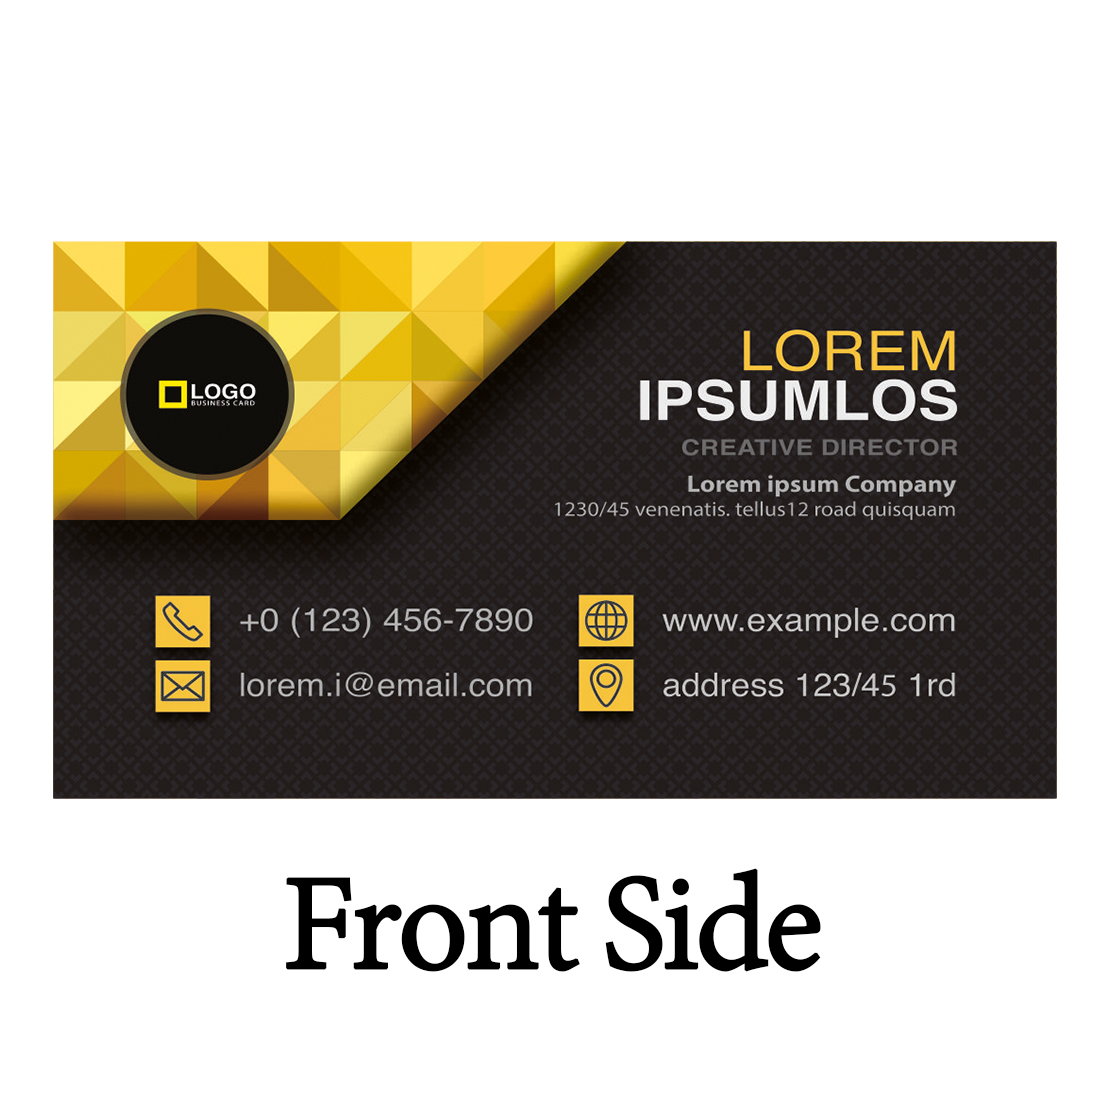 Golden Business Card Template cover image.